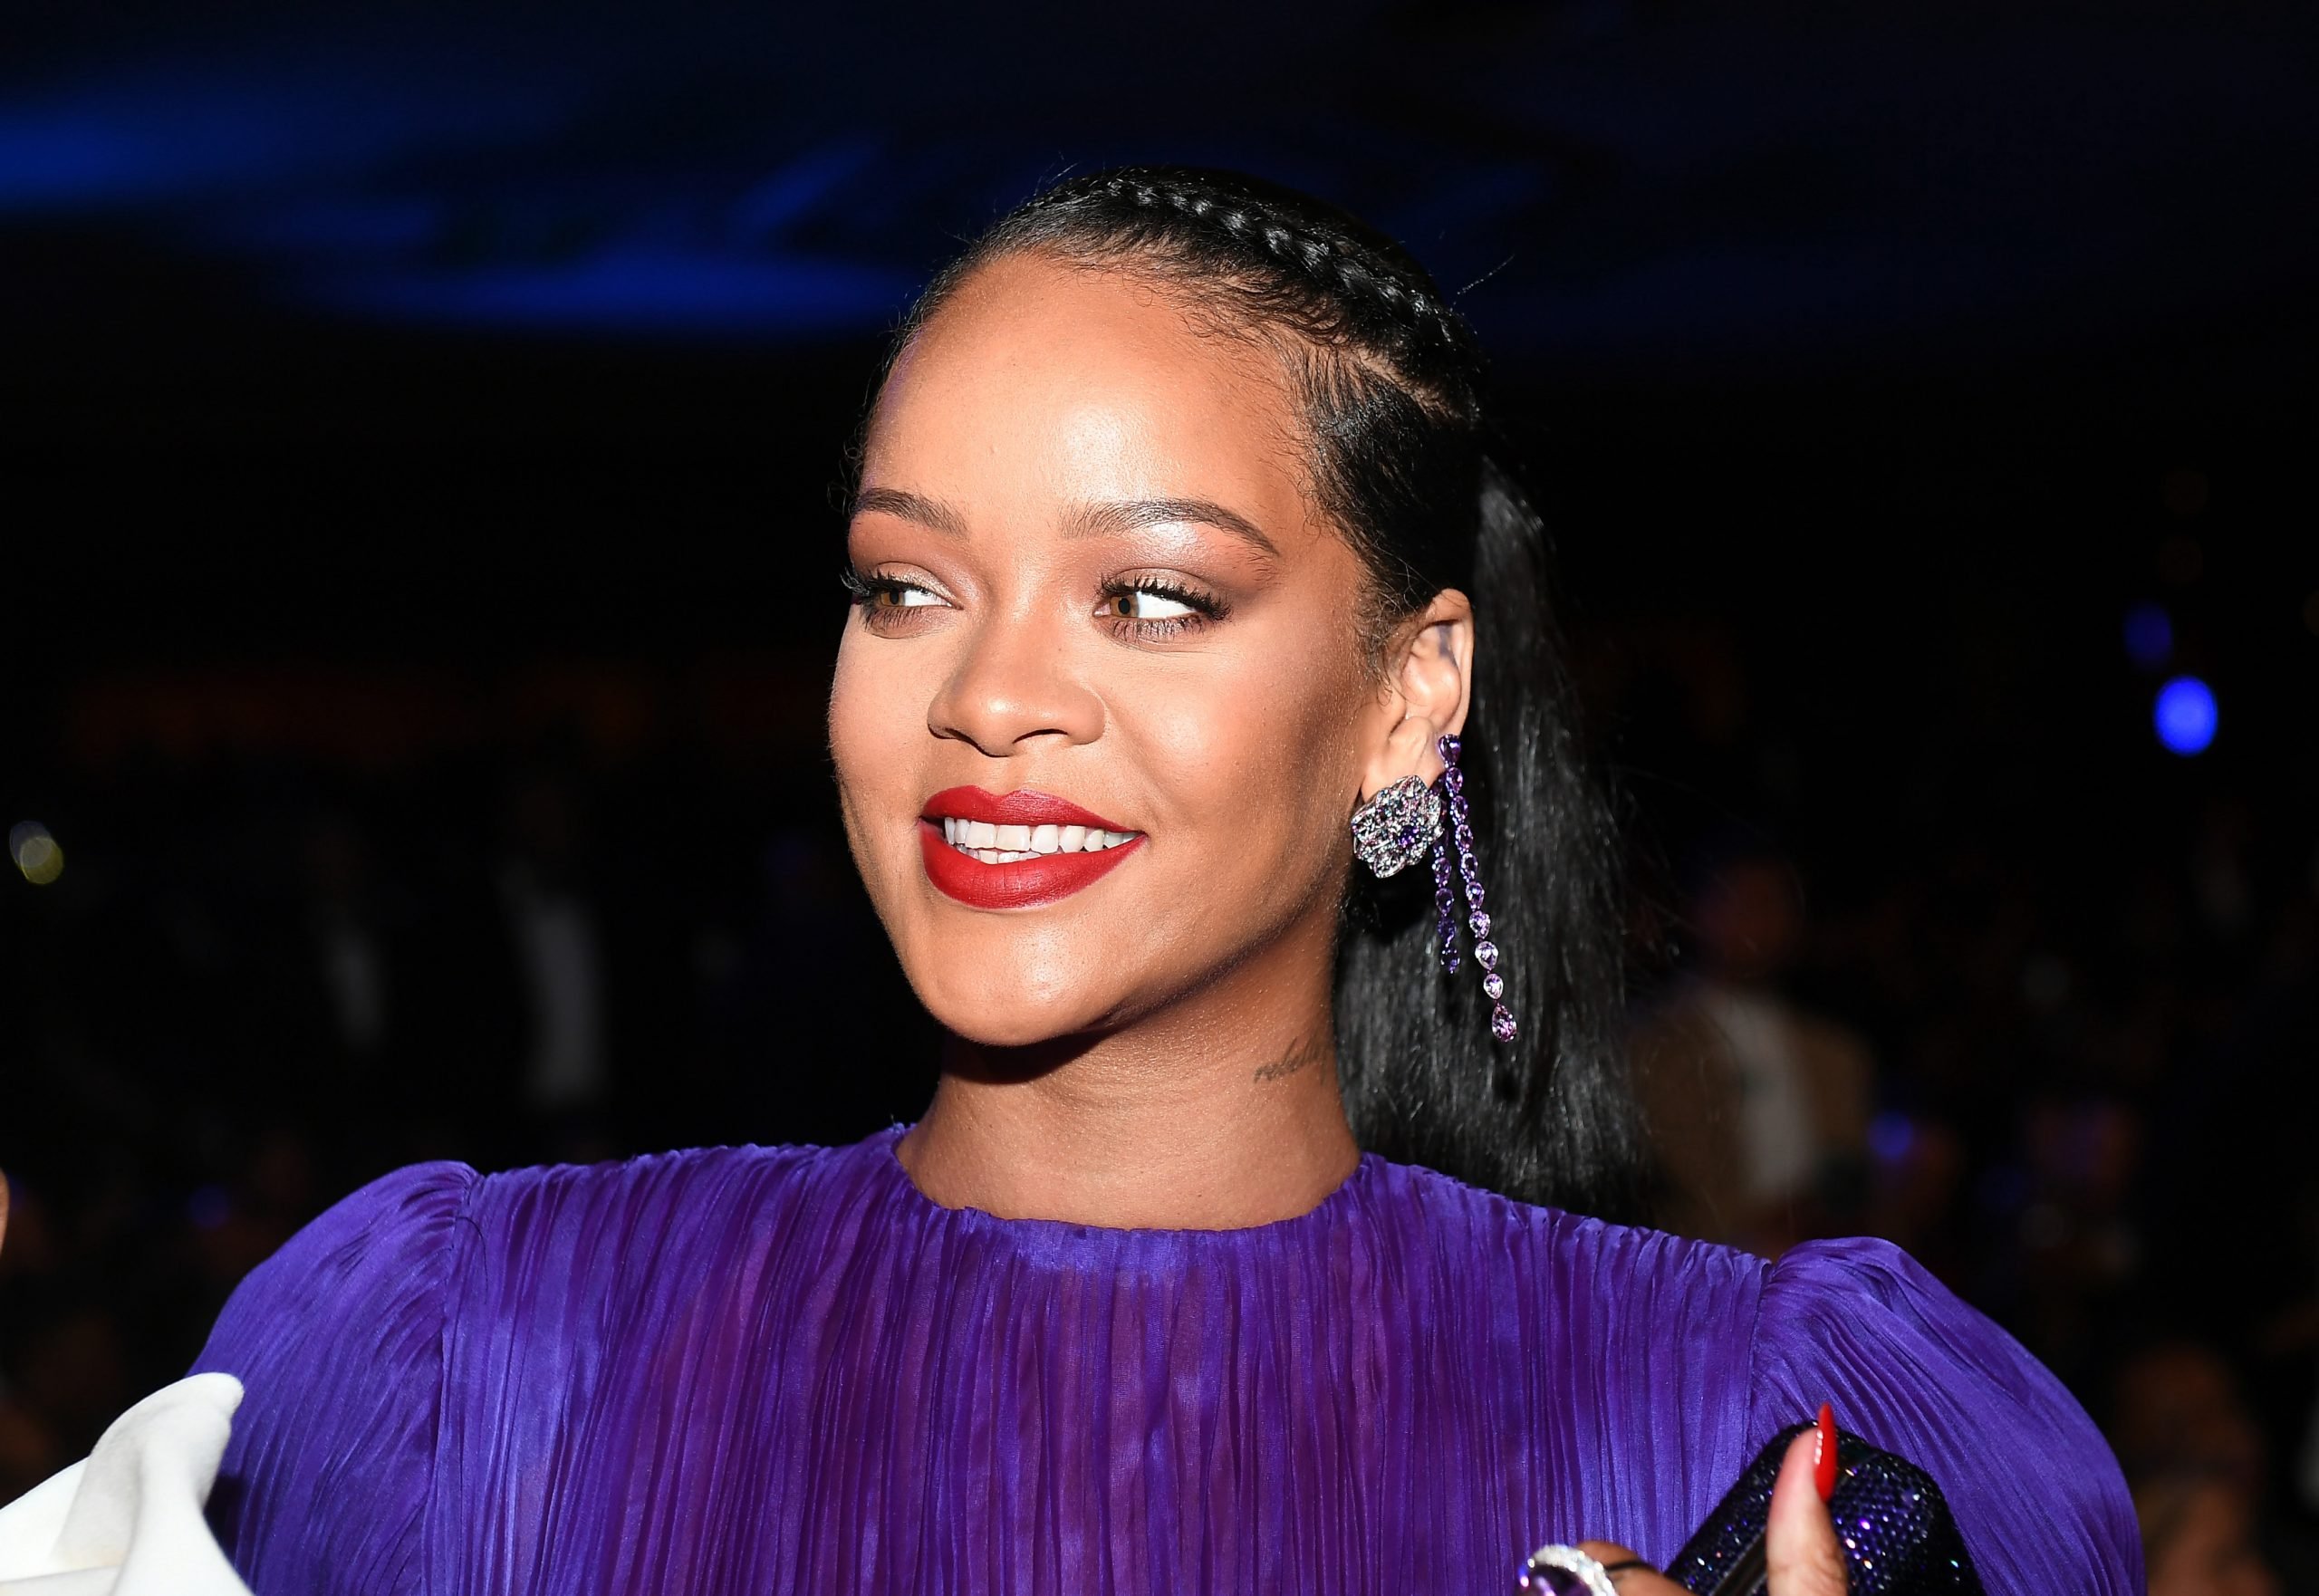 Rihanna Still Using Her Now Experimental Next Album to Mess With